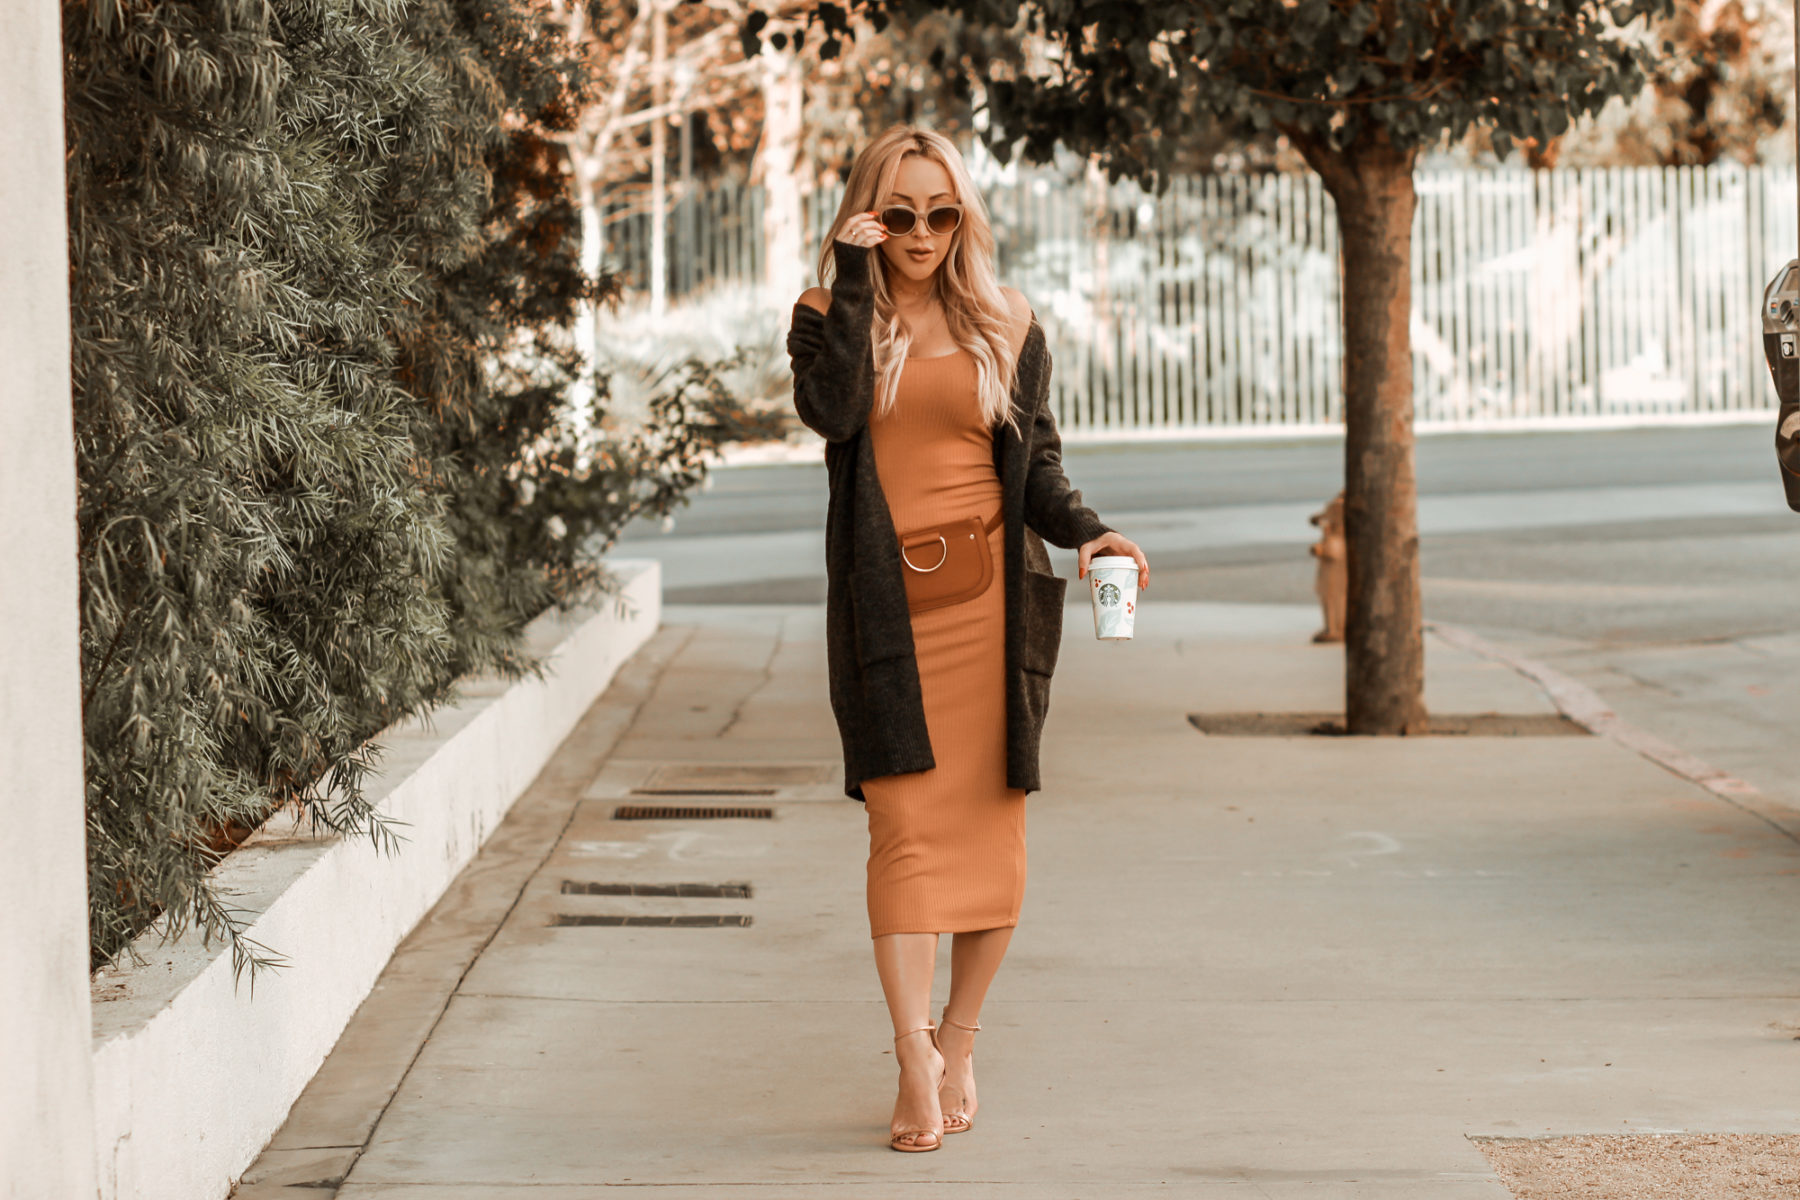 Thanksgiving Outfit Inspo | Fall Fashion | Forever 21 | Pumpkin Orange | Blondie in the City by Hayley Larue